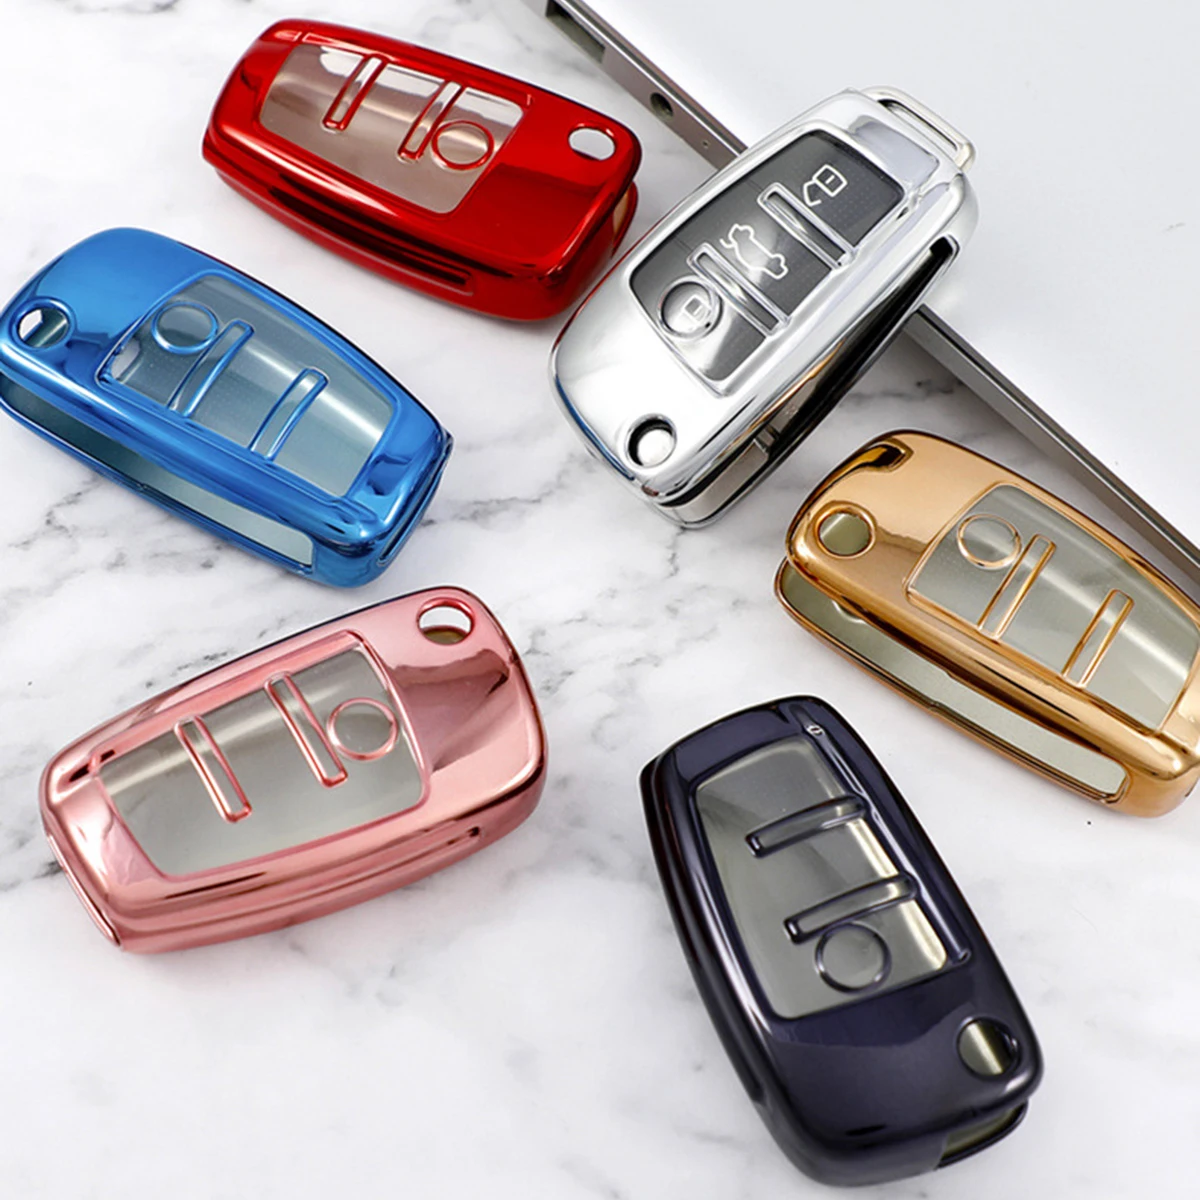 New Soft TPU Car Flip Key Case Cover Shell Fob for Audi A1 A3 S3 Q3 Q7 TT Protector Keychain Auto Accessories